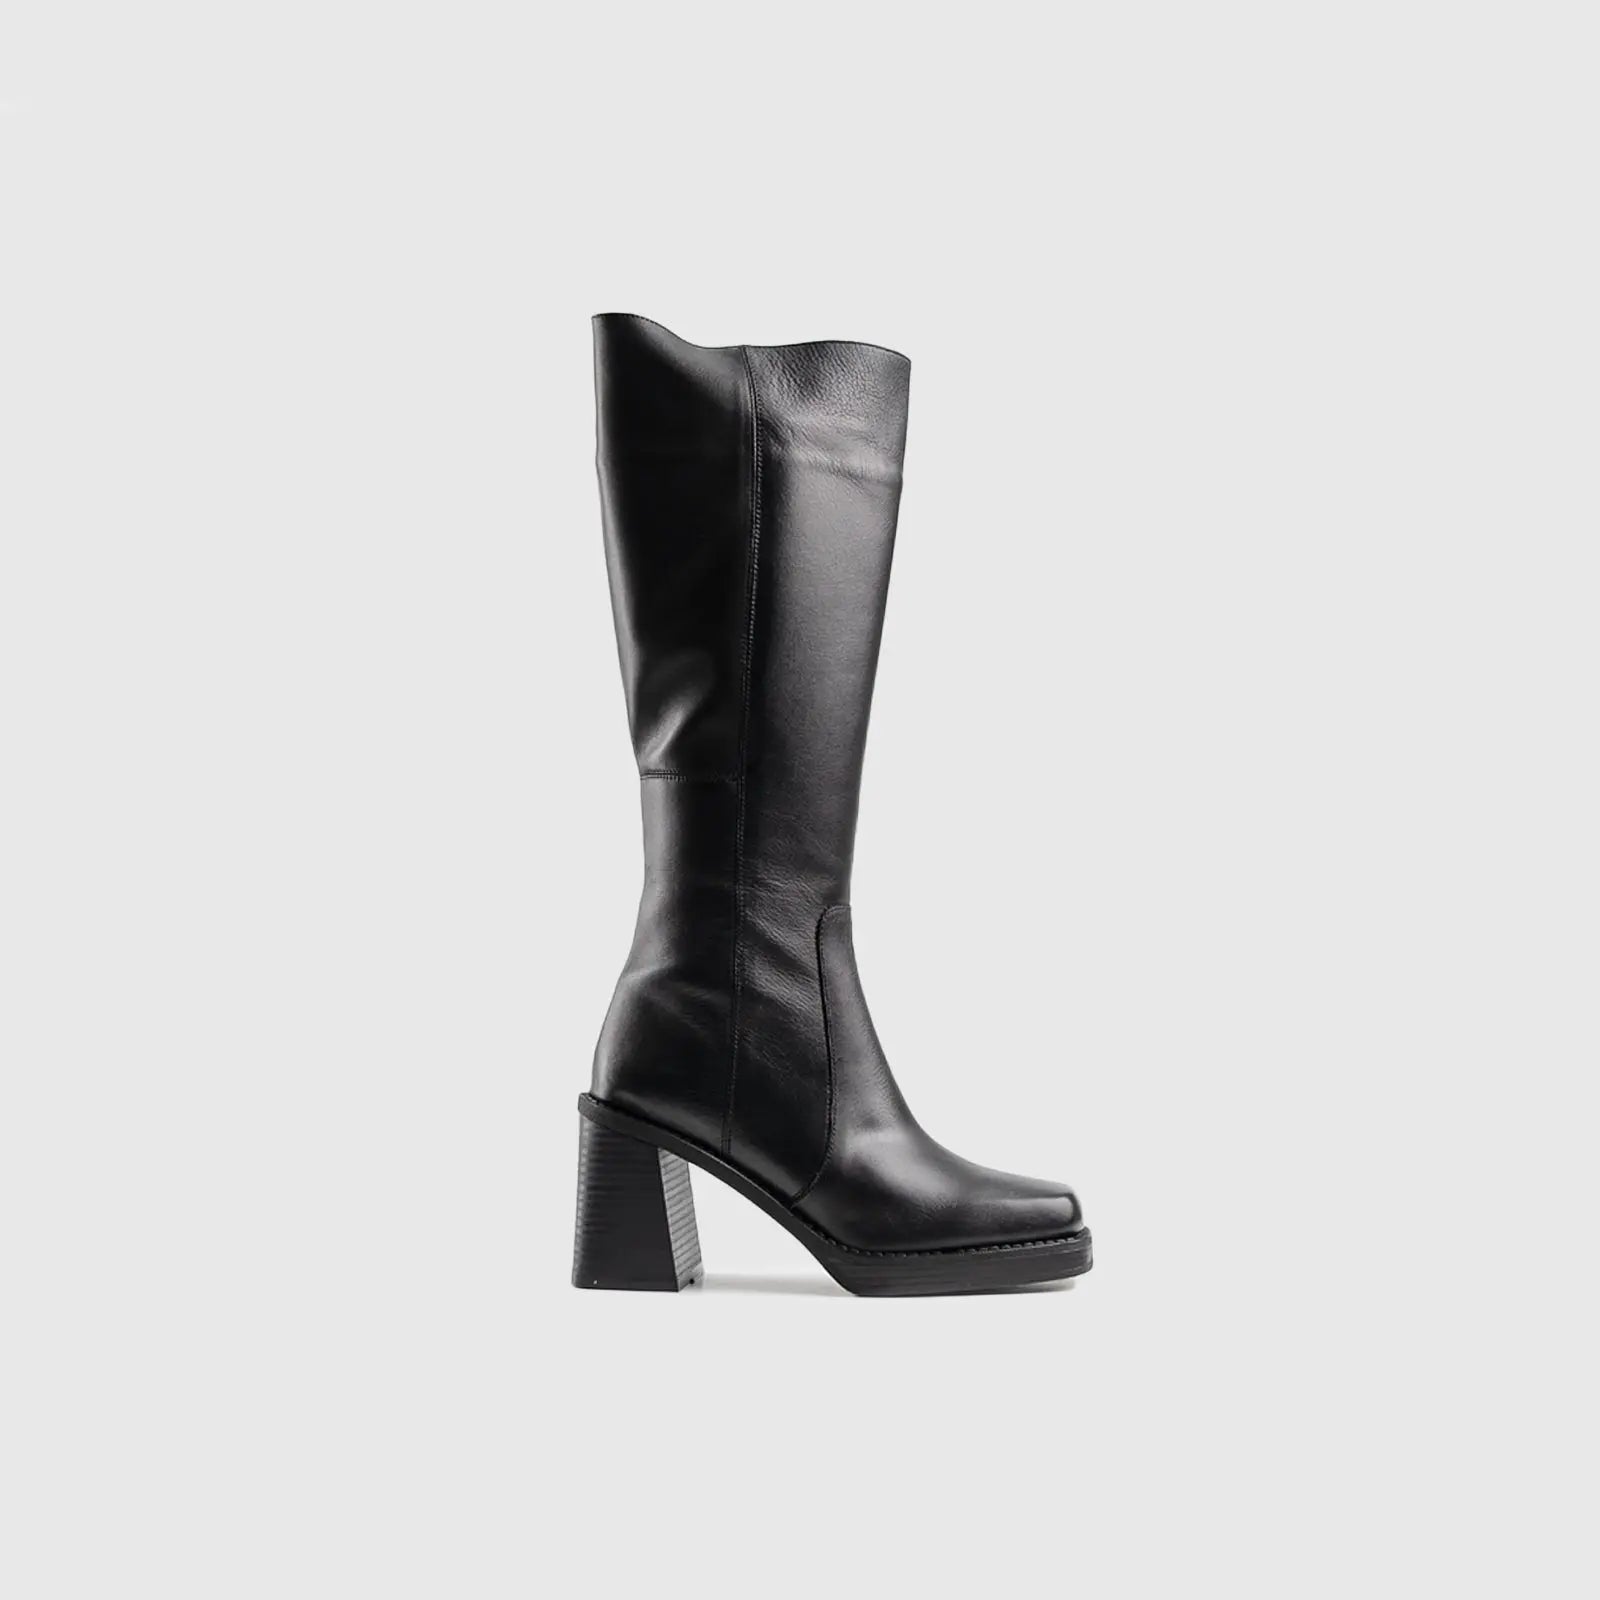 Leather Boots Black 11528 Boots | familyshoecentre